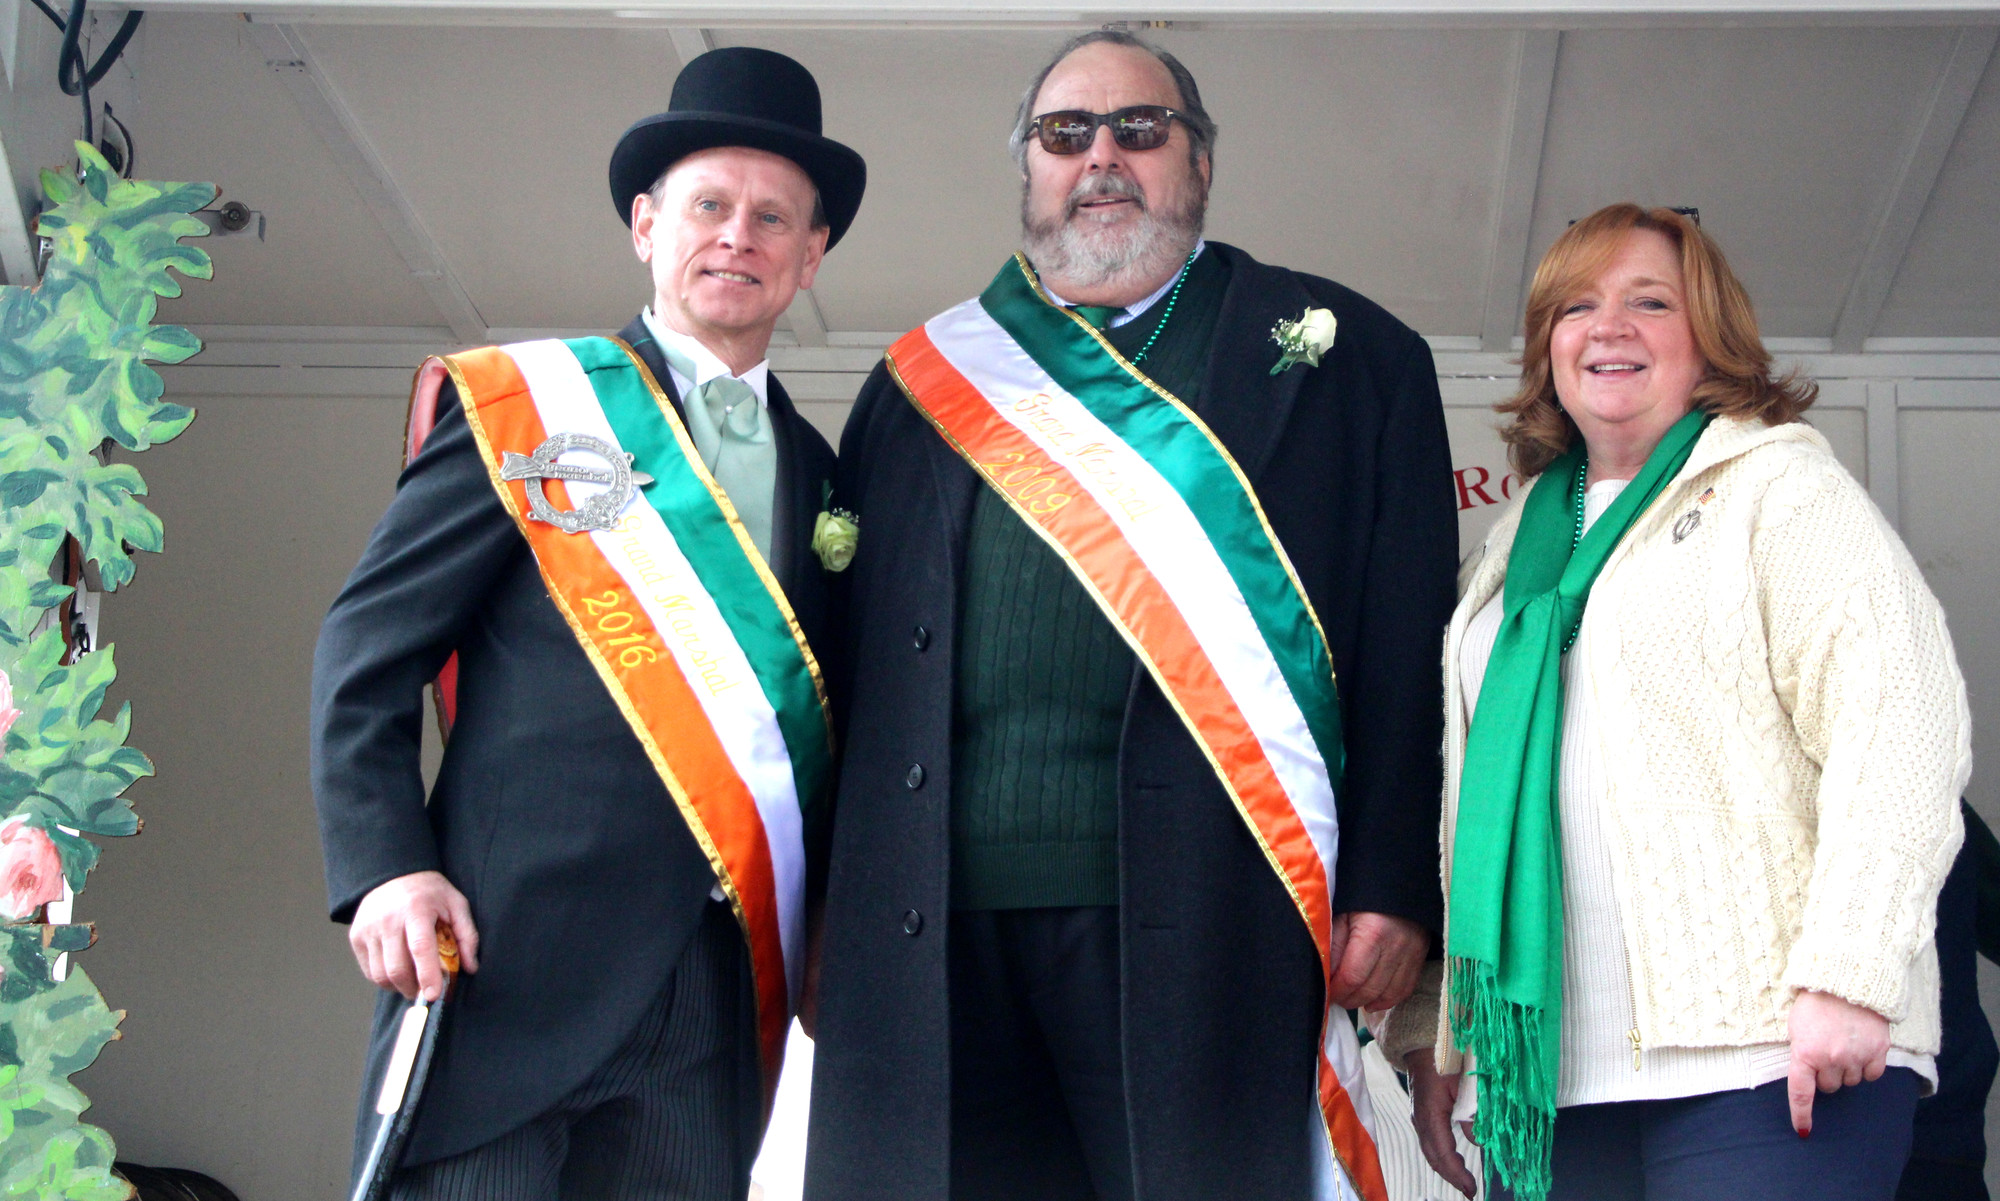 After leading the parade through the village, O’Reilly, left, joined Mayor Francis X. Murray and Deputy Mayor Nancy Howard on the reviewing stand.